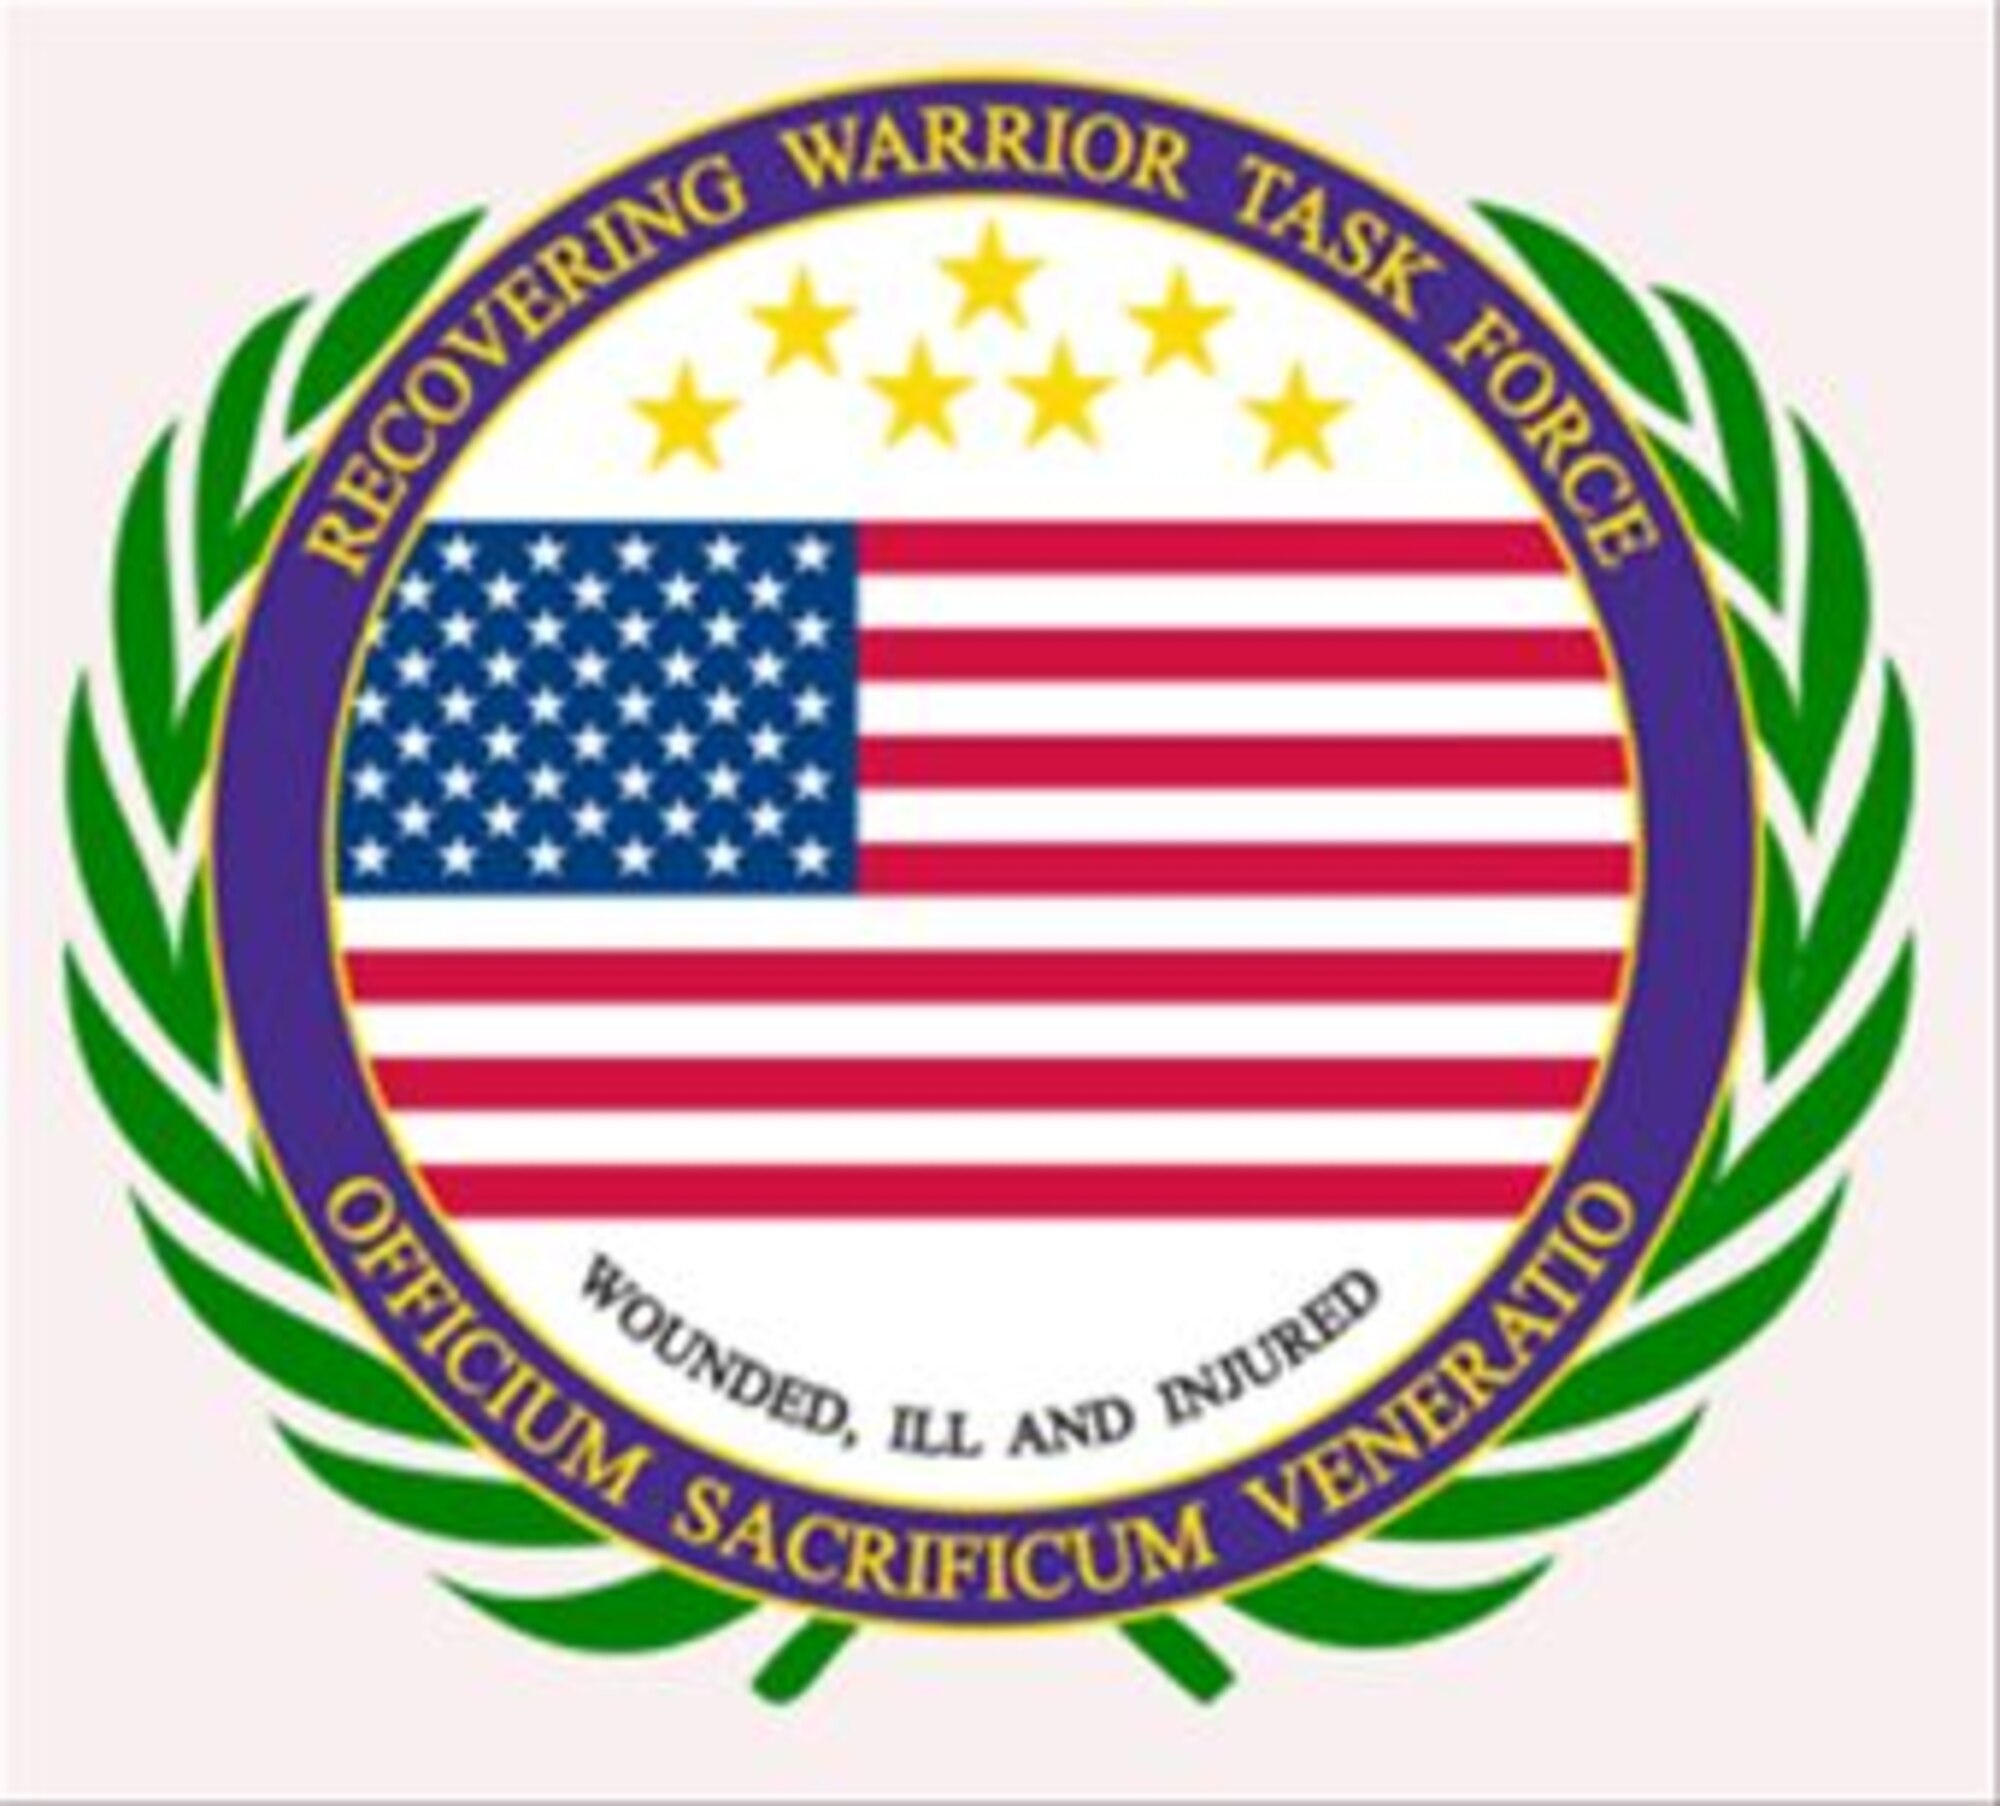 The Recovering Warrior Task Force visited the Wilford Hall Ambulatory Surgical Center, Dec. 11 to conduct a focus group with wounded warriors and meet with senior leaders. (Courtesy Photo)